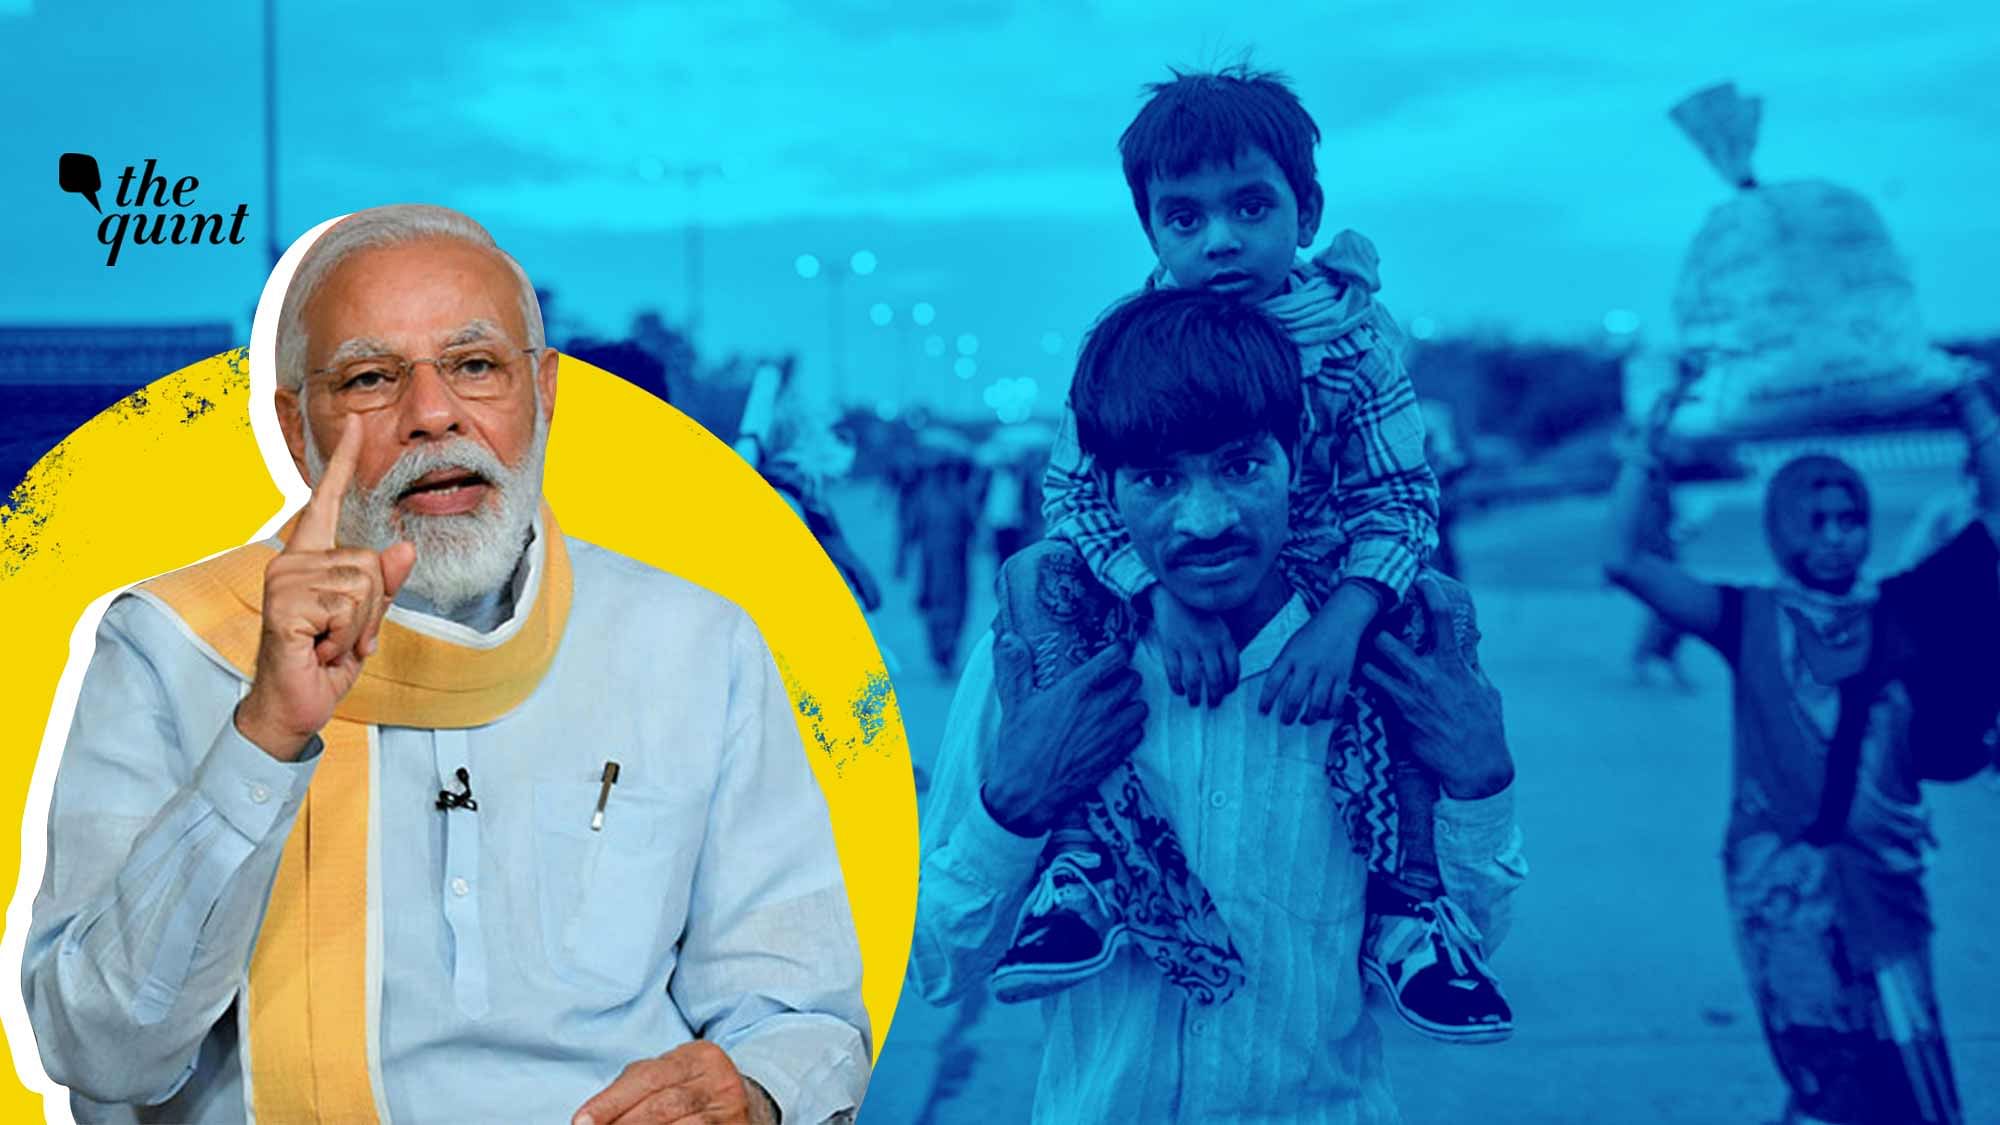 <div class="paragraphs"><p>PM Narendra Modi alleged that the Opposition parties instigated <a href="https://www.thequint.com/lifestyle/books/homebound-puja-changoiwala-book-excerpt-covid19-lockdown-migrant-labour-exodus-crisis">migrant workers</a> to breach lockdown during the first wave of COVID-19 and that the Congress party has become “leader of the tukde-tukde gang.”</p></div>